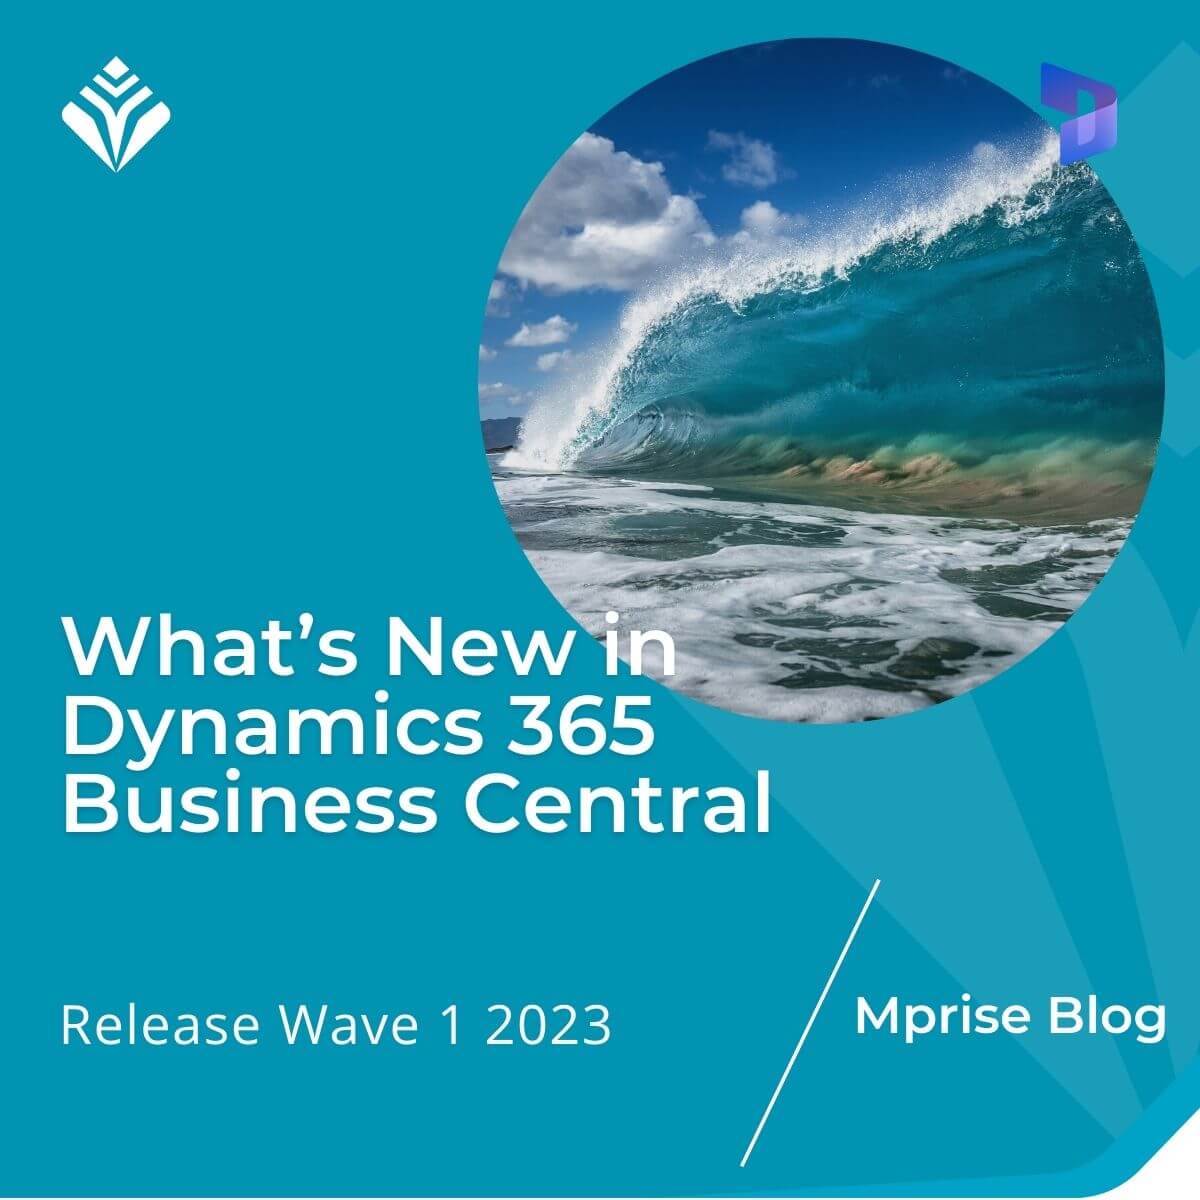 What’s New in Dynamics 365 Business Central in 2023 release wave 1